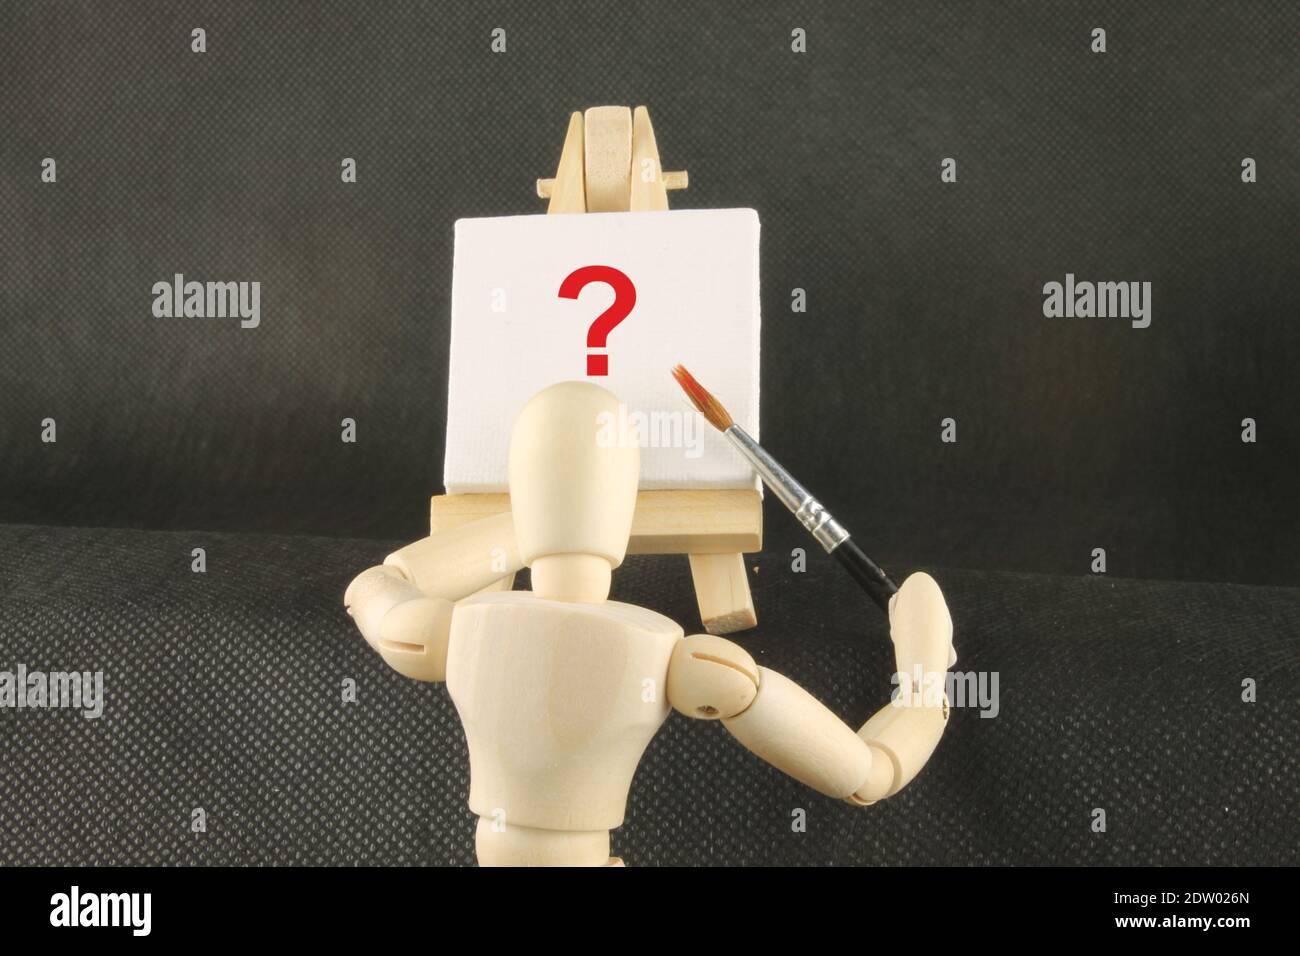 Mannequin in front of an easel with a red question mark, Artist's block concept Stock Photo